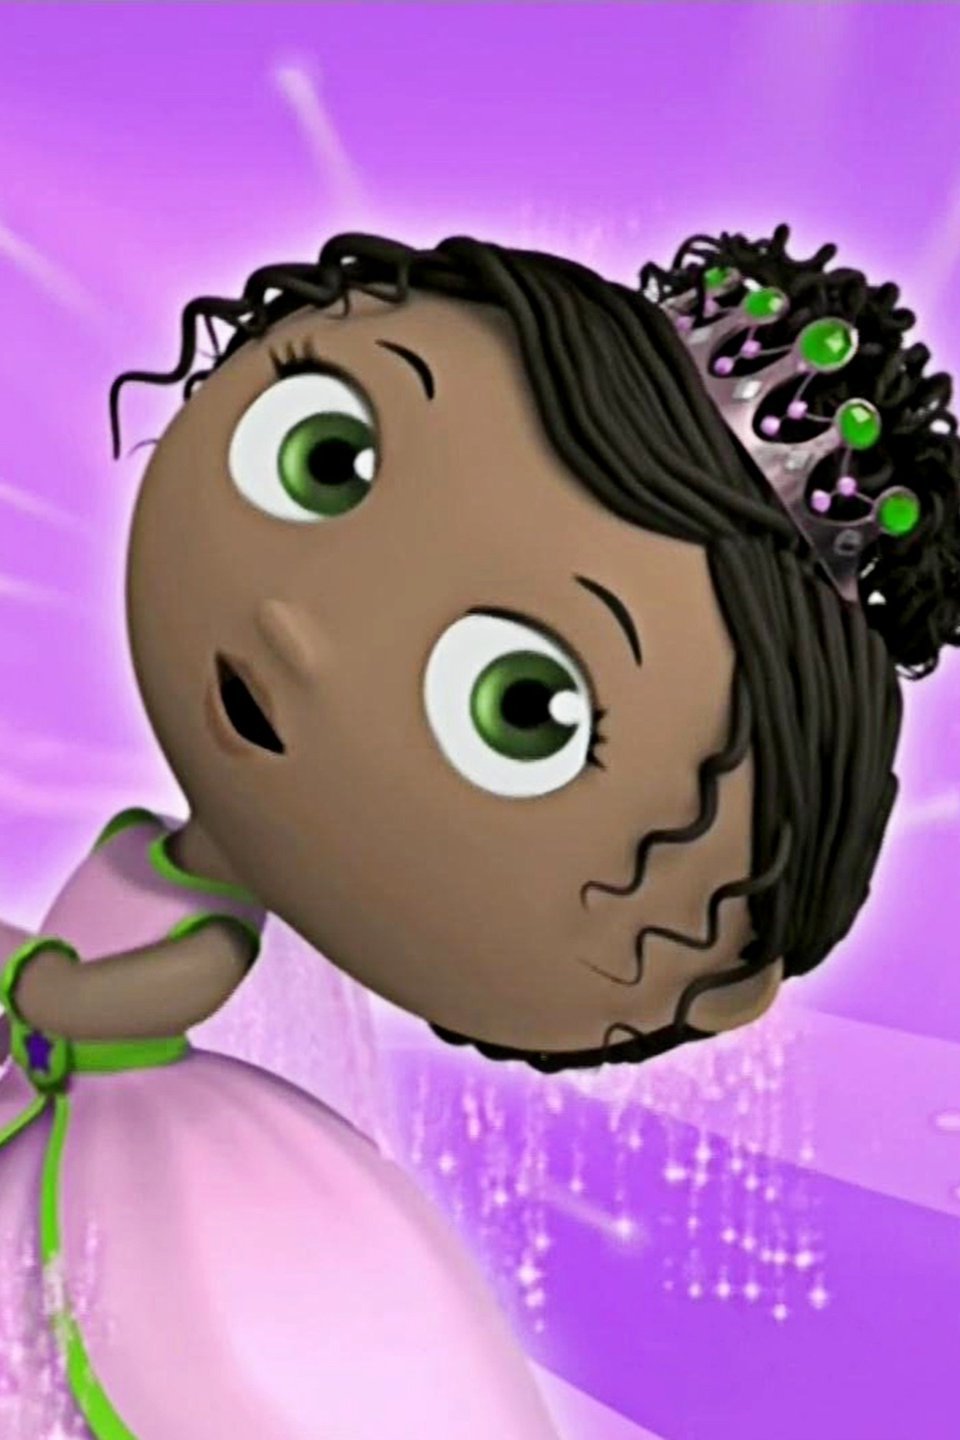 Super Why! and the Little Mermaid Pictures Rotten Tomatoes